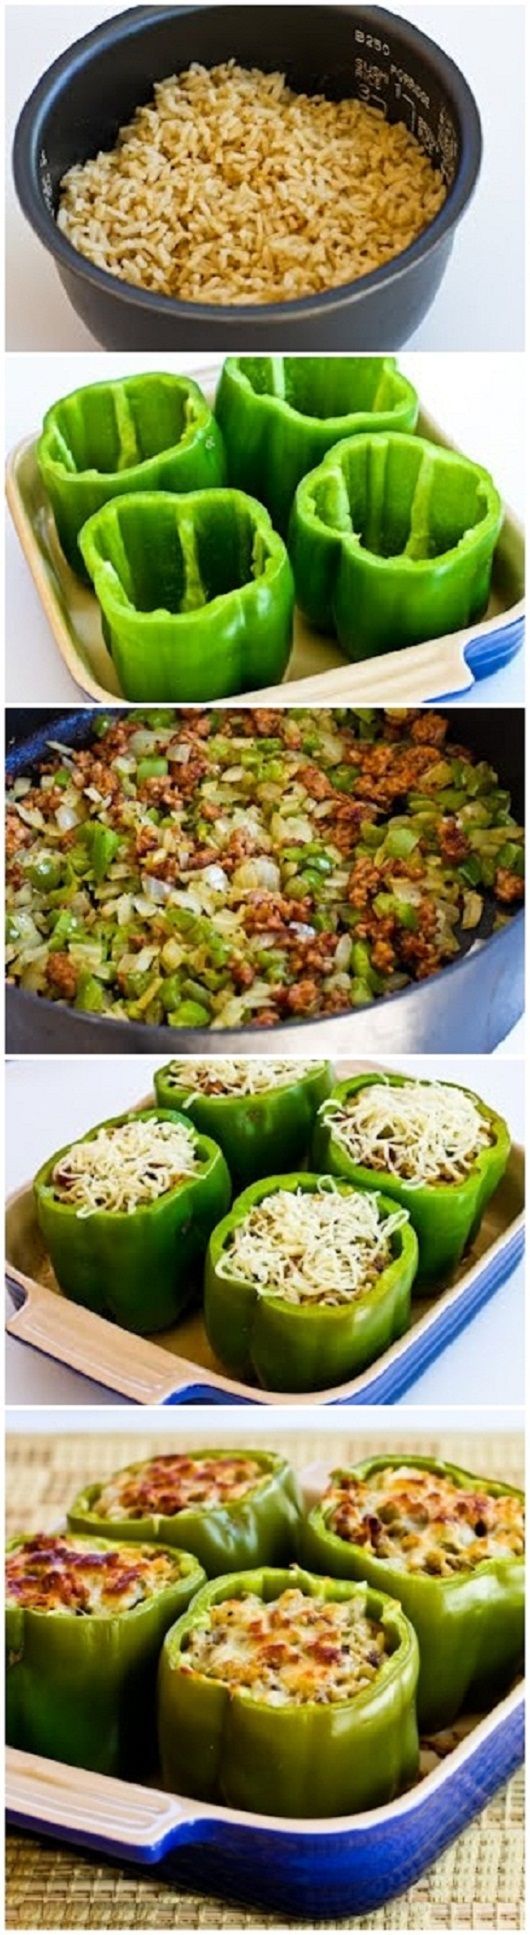 Stuffed  Peppers with Brown Rice, Italian Sausage, and Parmesan. (Id love this with yellow, red, or orange peppers instead of